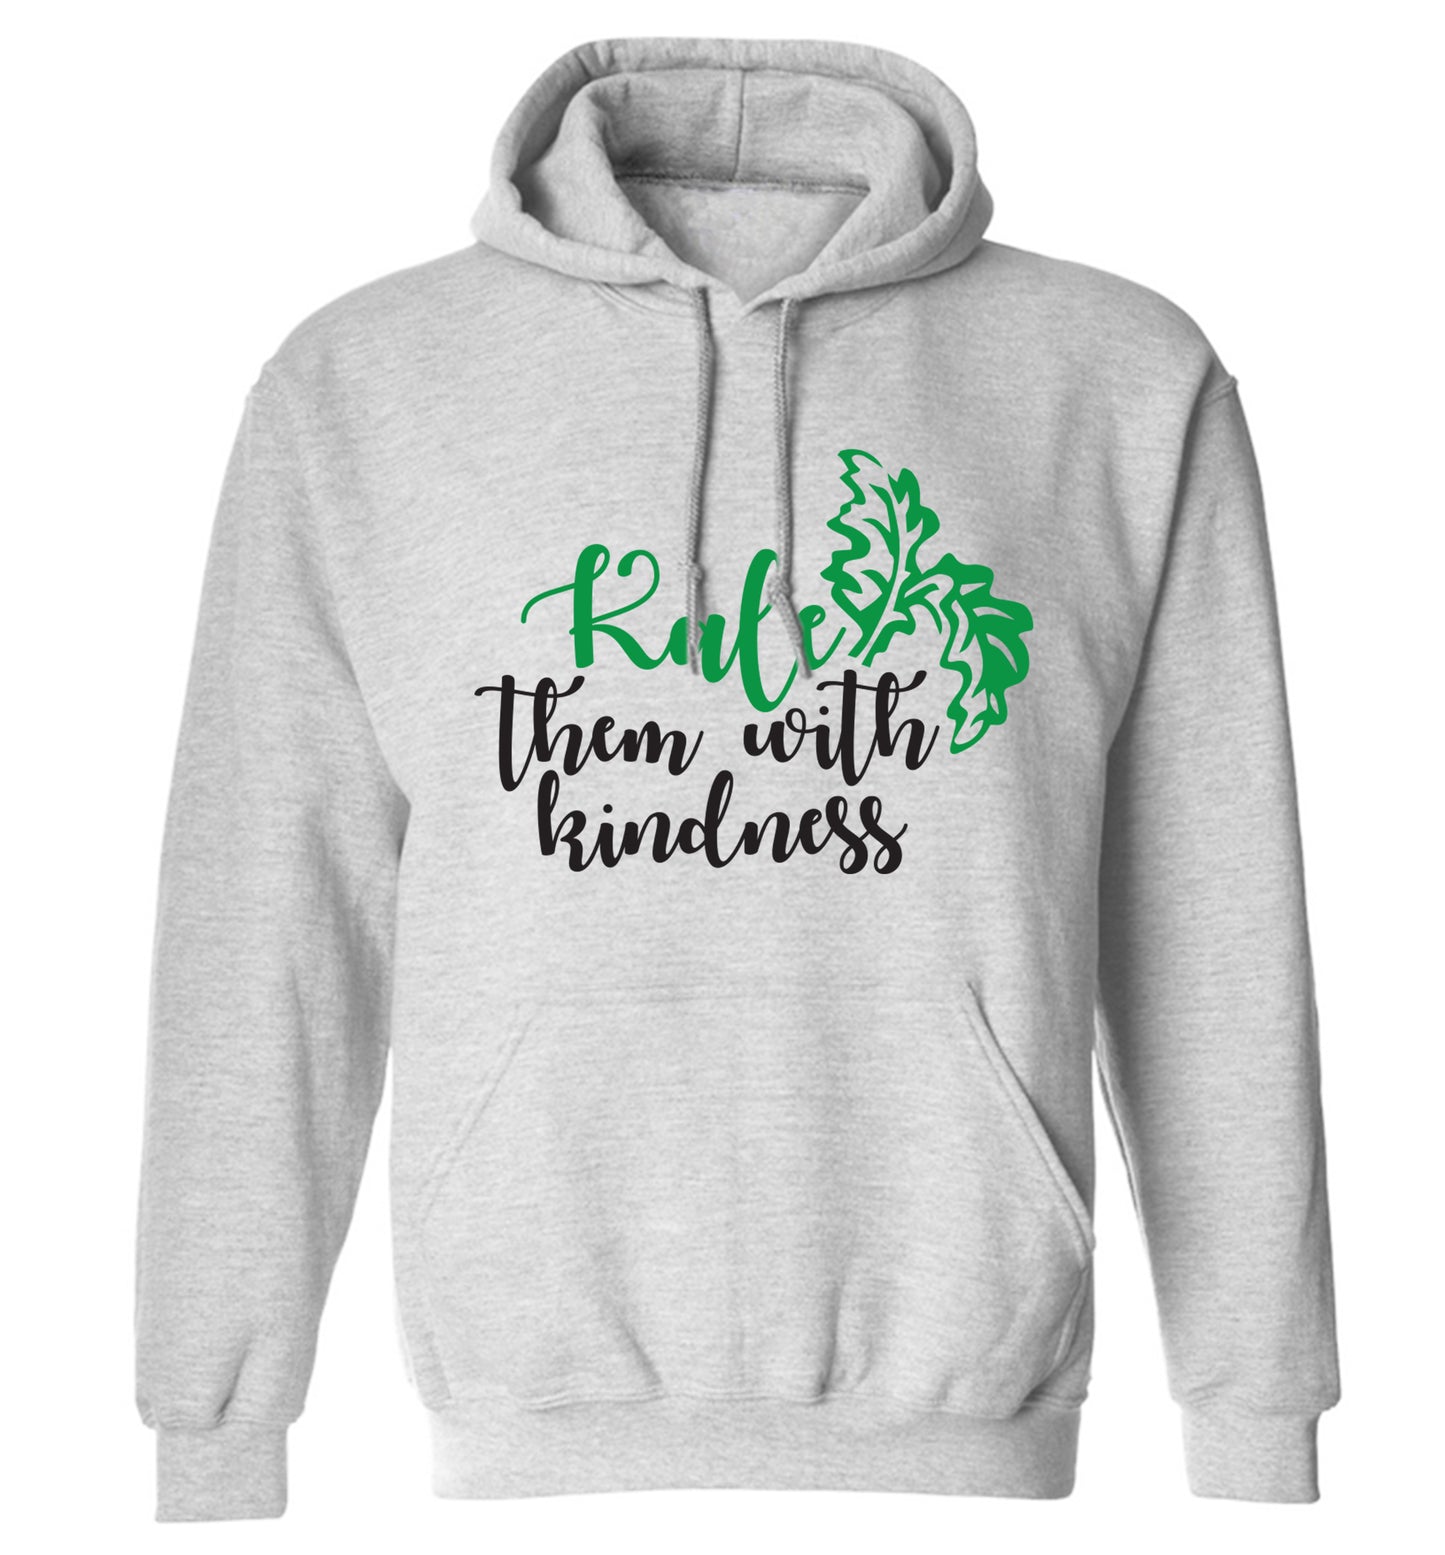 Kale them with kindness adults unisex grey hoodie 2XL